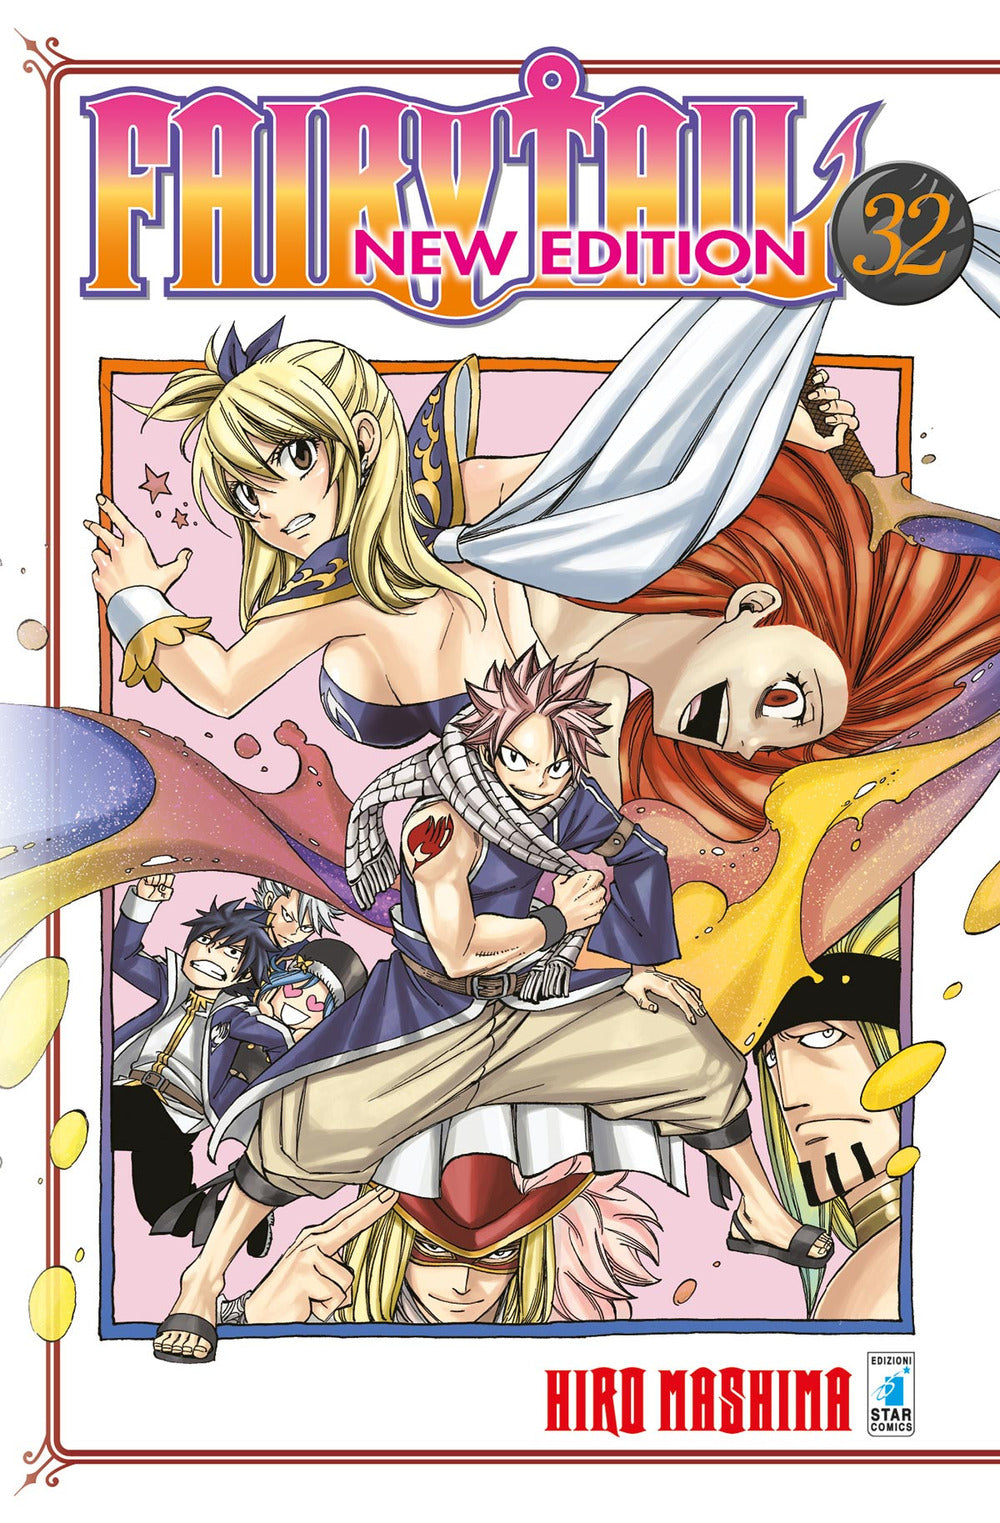 Fairy Tail. New edition. Vol. 32.